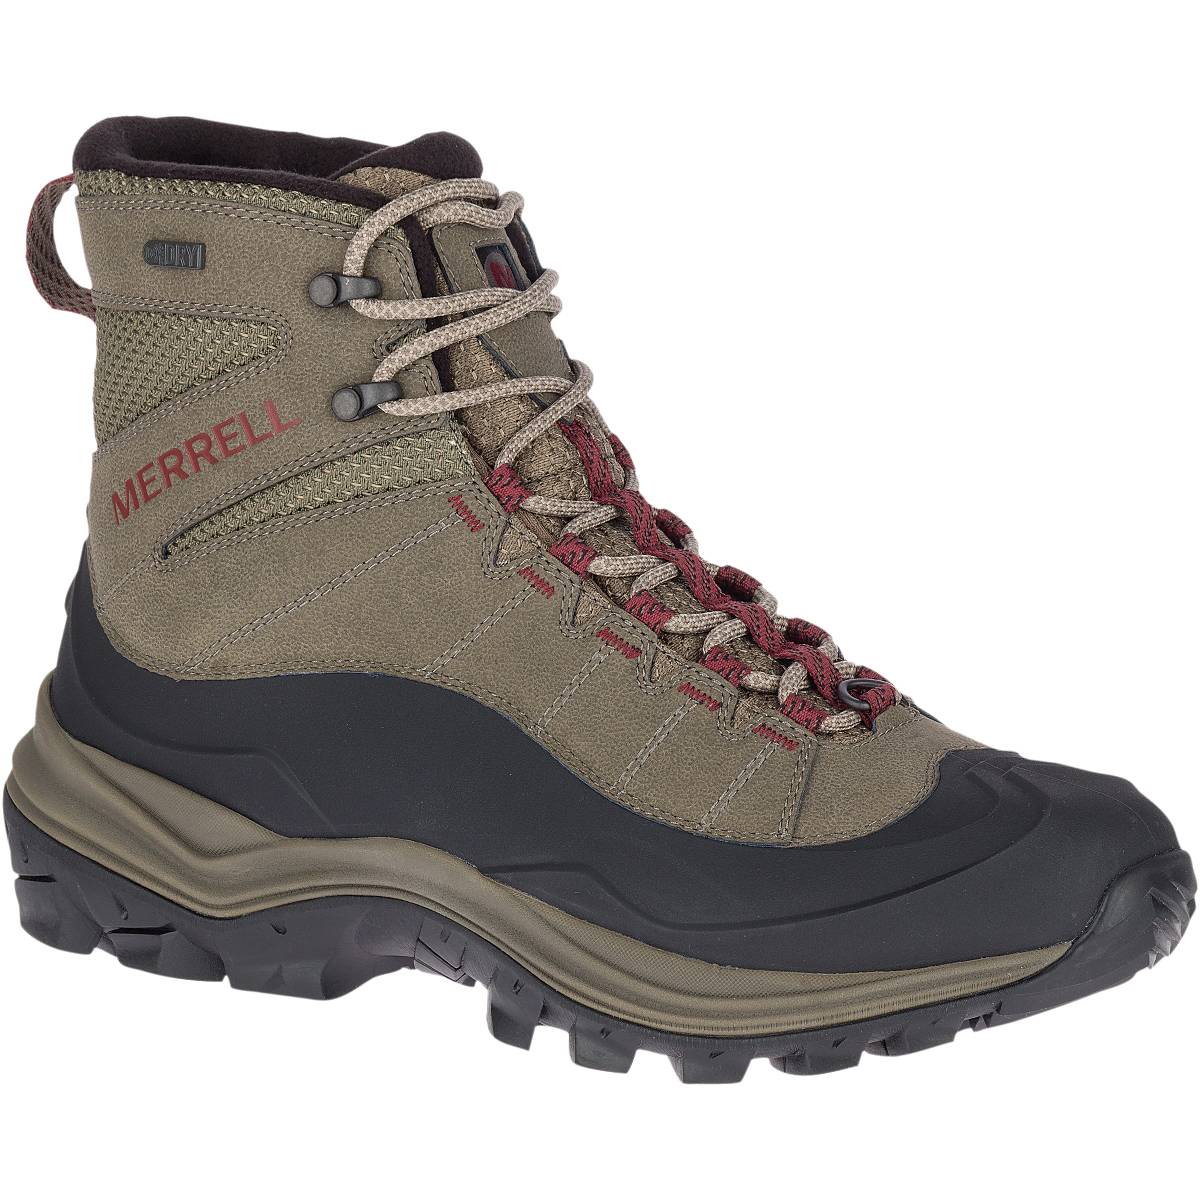 Merrell Thermo Chill Mid Shell Waterproof - Pánske Zimné Topánky - Hnede (SK-22054)